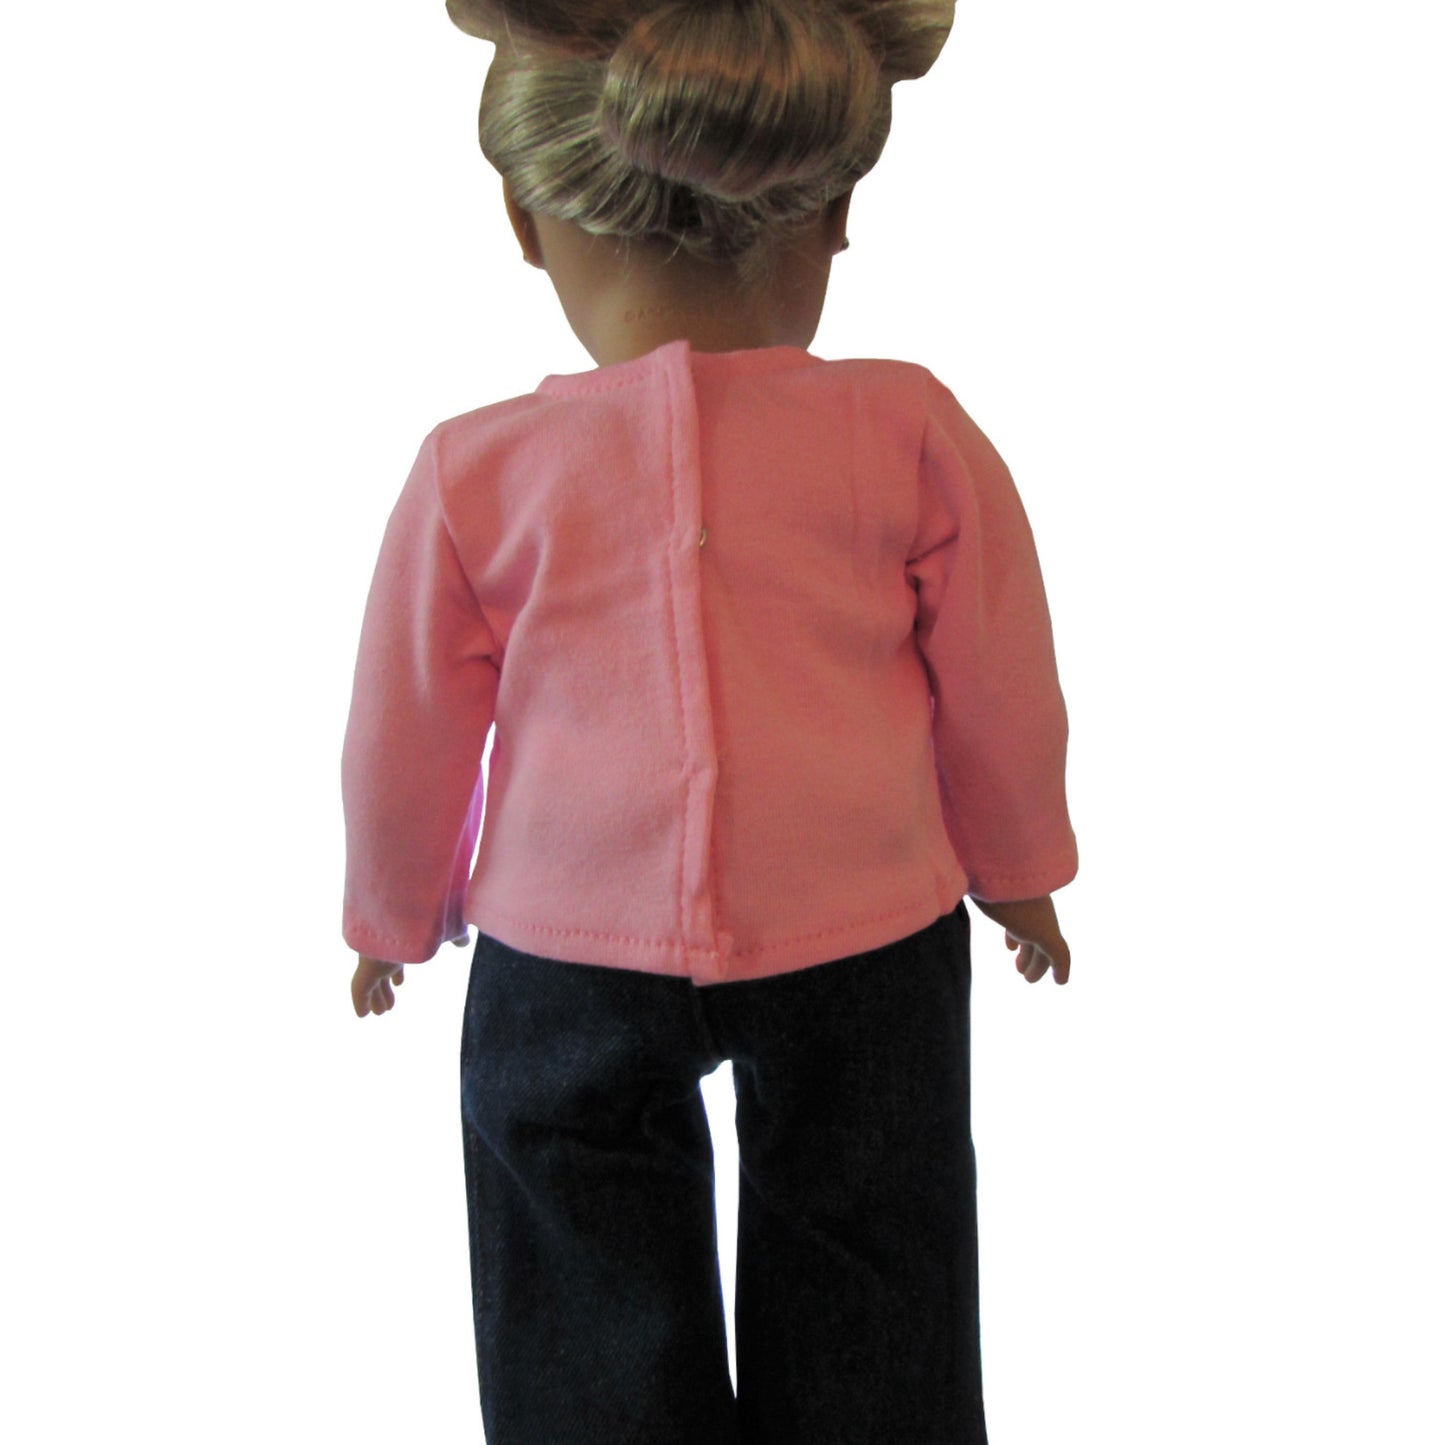 Pink Long Sleeve Top with Two Diagonal Ruffles for 18-inch dolls